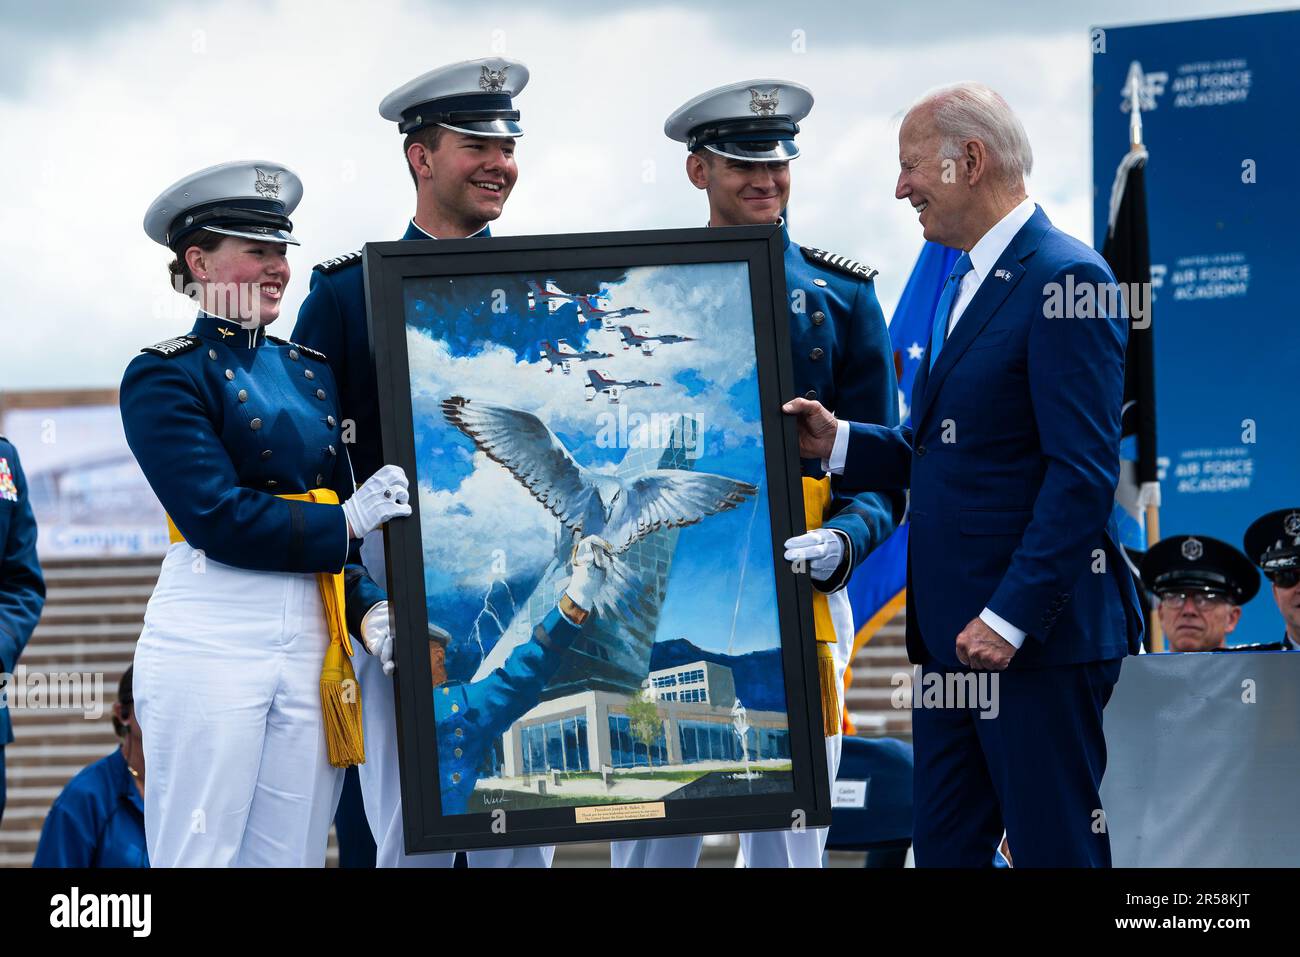 Colorado Springs, United States of America. 01 June, 2023. U.S President Joe Biden accepts a gift of a painting from the Class of 2023 cadets during the commencement ceremony for the United States Air Force Academy graduation at Falcon Stadium, June 1, 2023 in Colorado Springs, Colorado. Credit: Trevor Cokley/U.S. Air Force Photo/Alamy Live News Stock Photo